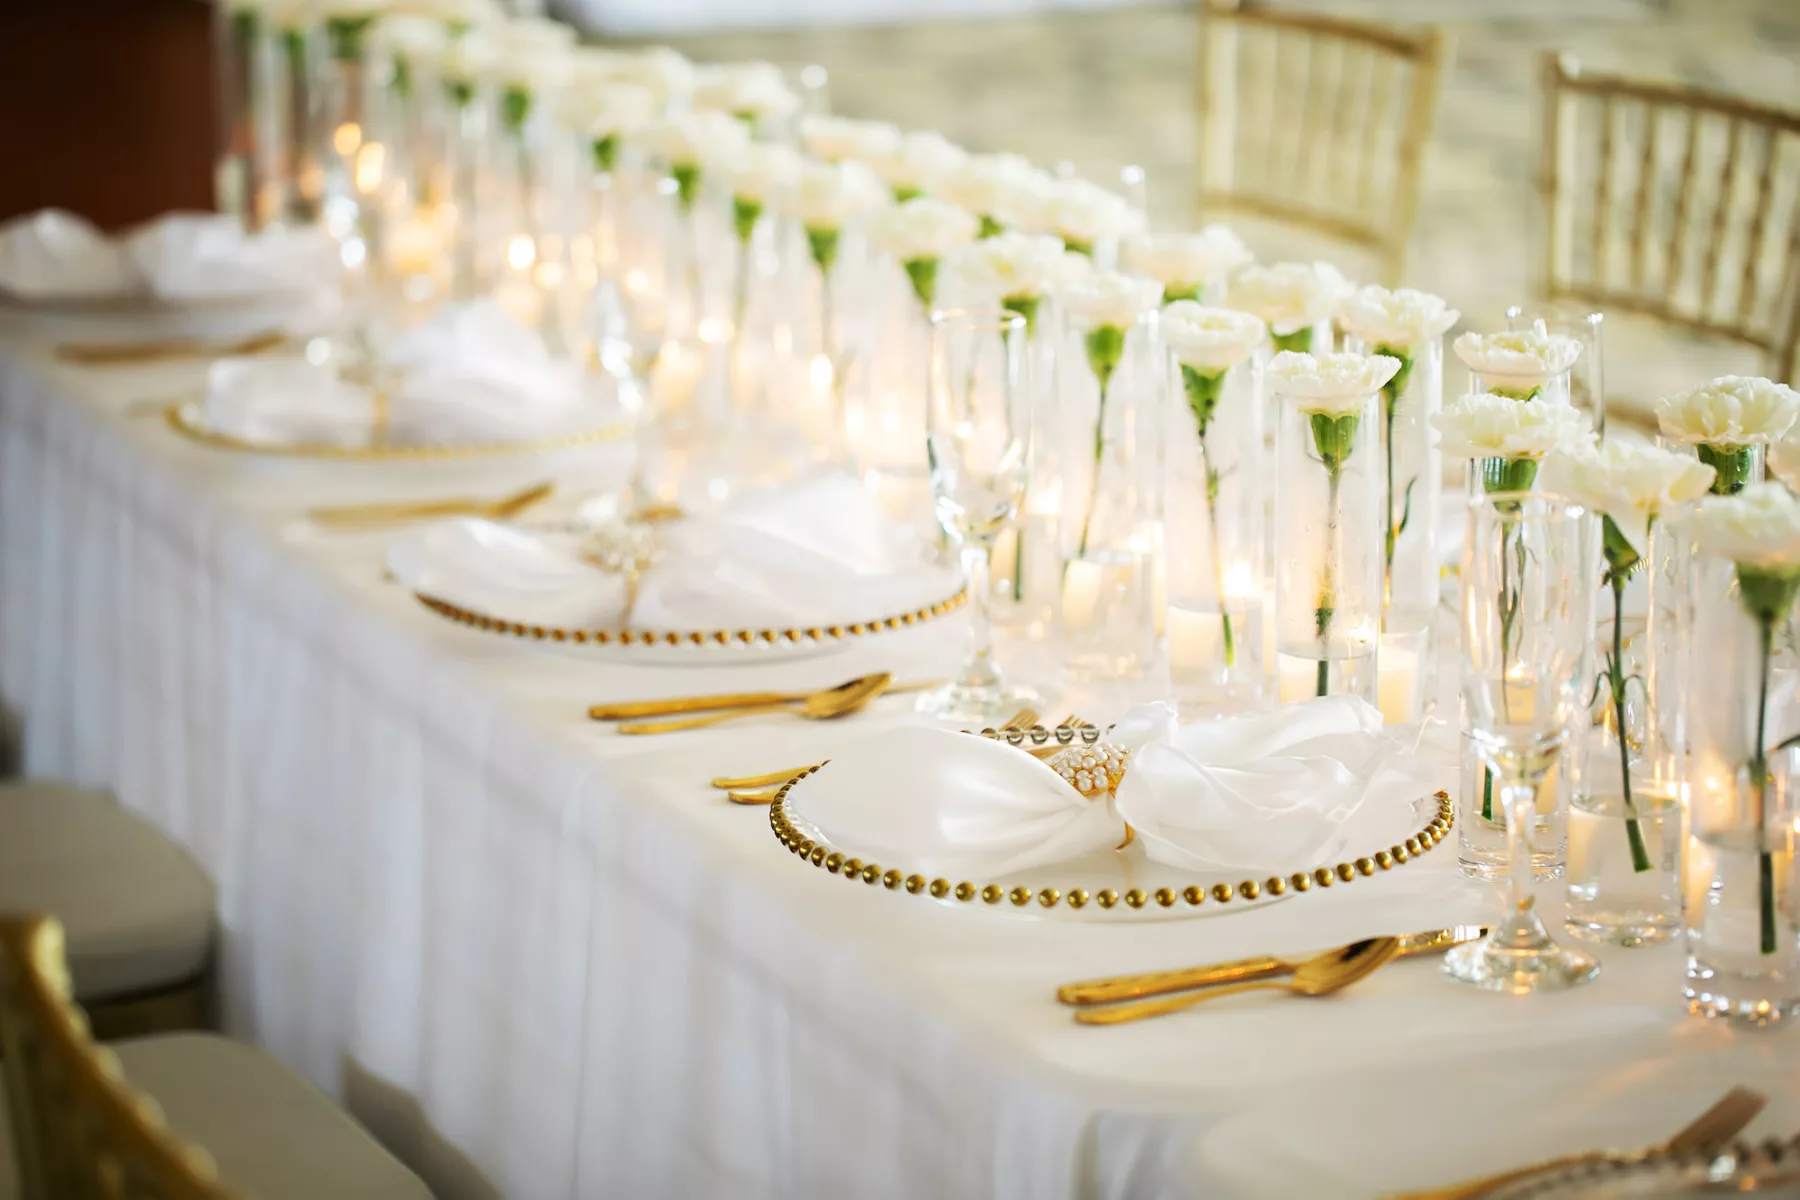 Classic Wedding Reception Gold Rimmed Beaded Chargers with Gold Flatware Tablescape Place Setting Ideas | Single White Carnation in Glass Vase and Candles Centerpiece Inspiration | Ybor Event Rentals Outside The Box Rentals